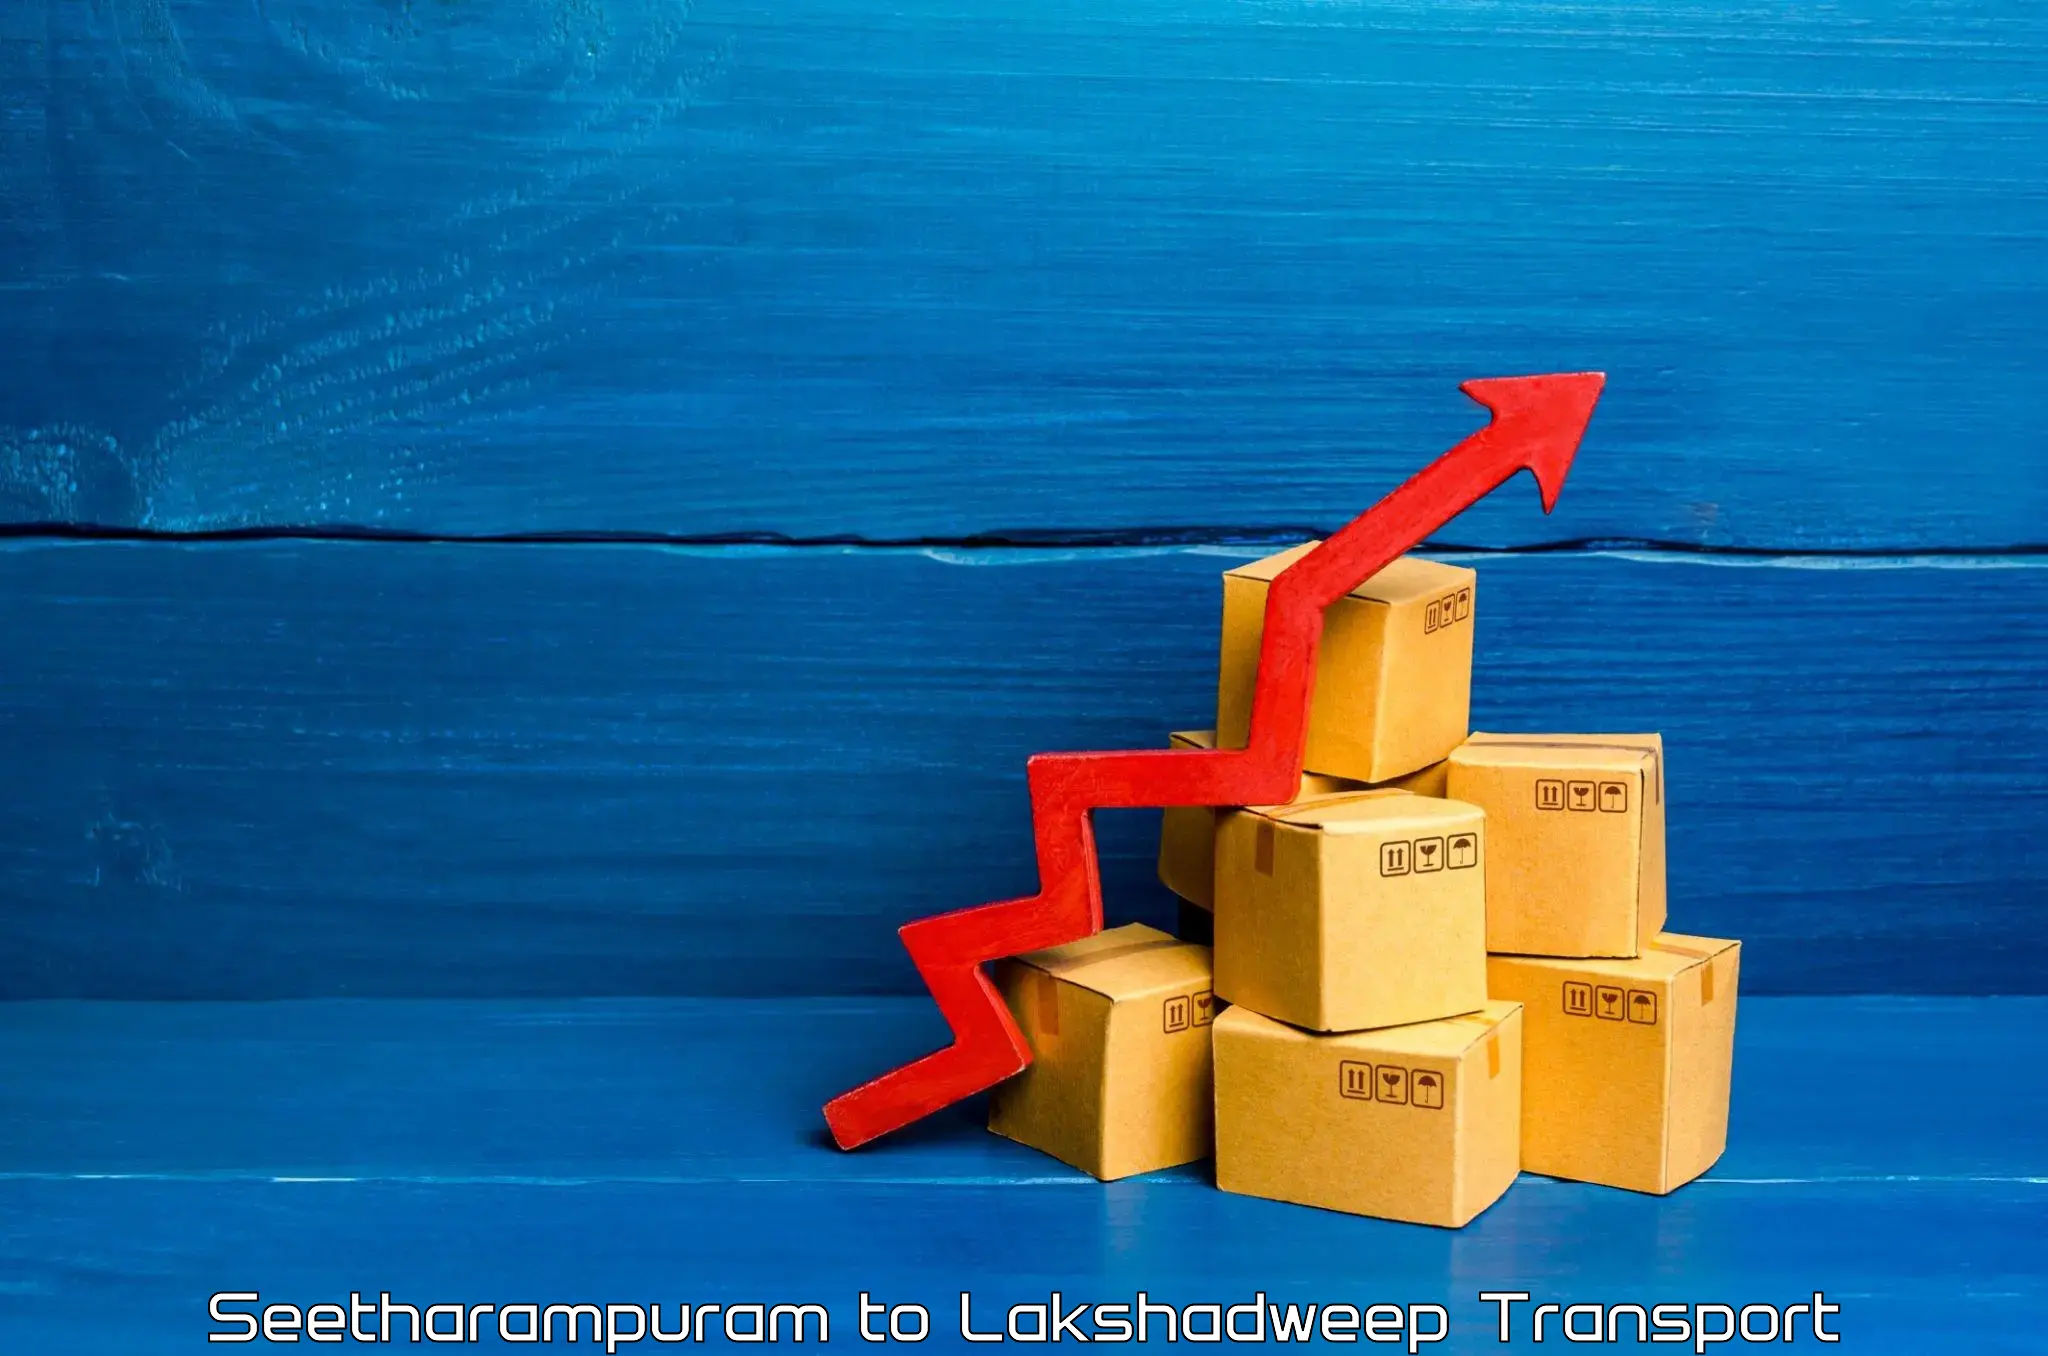 Goods delivery service Seetharampuram to Lakshadweep